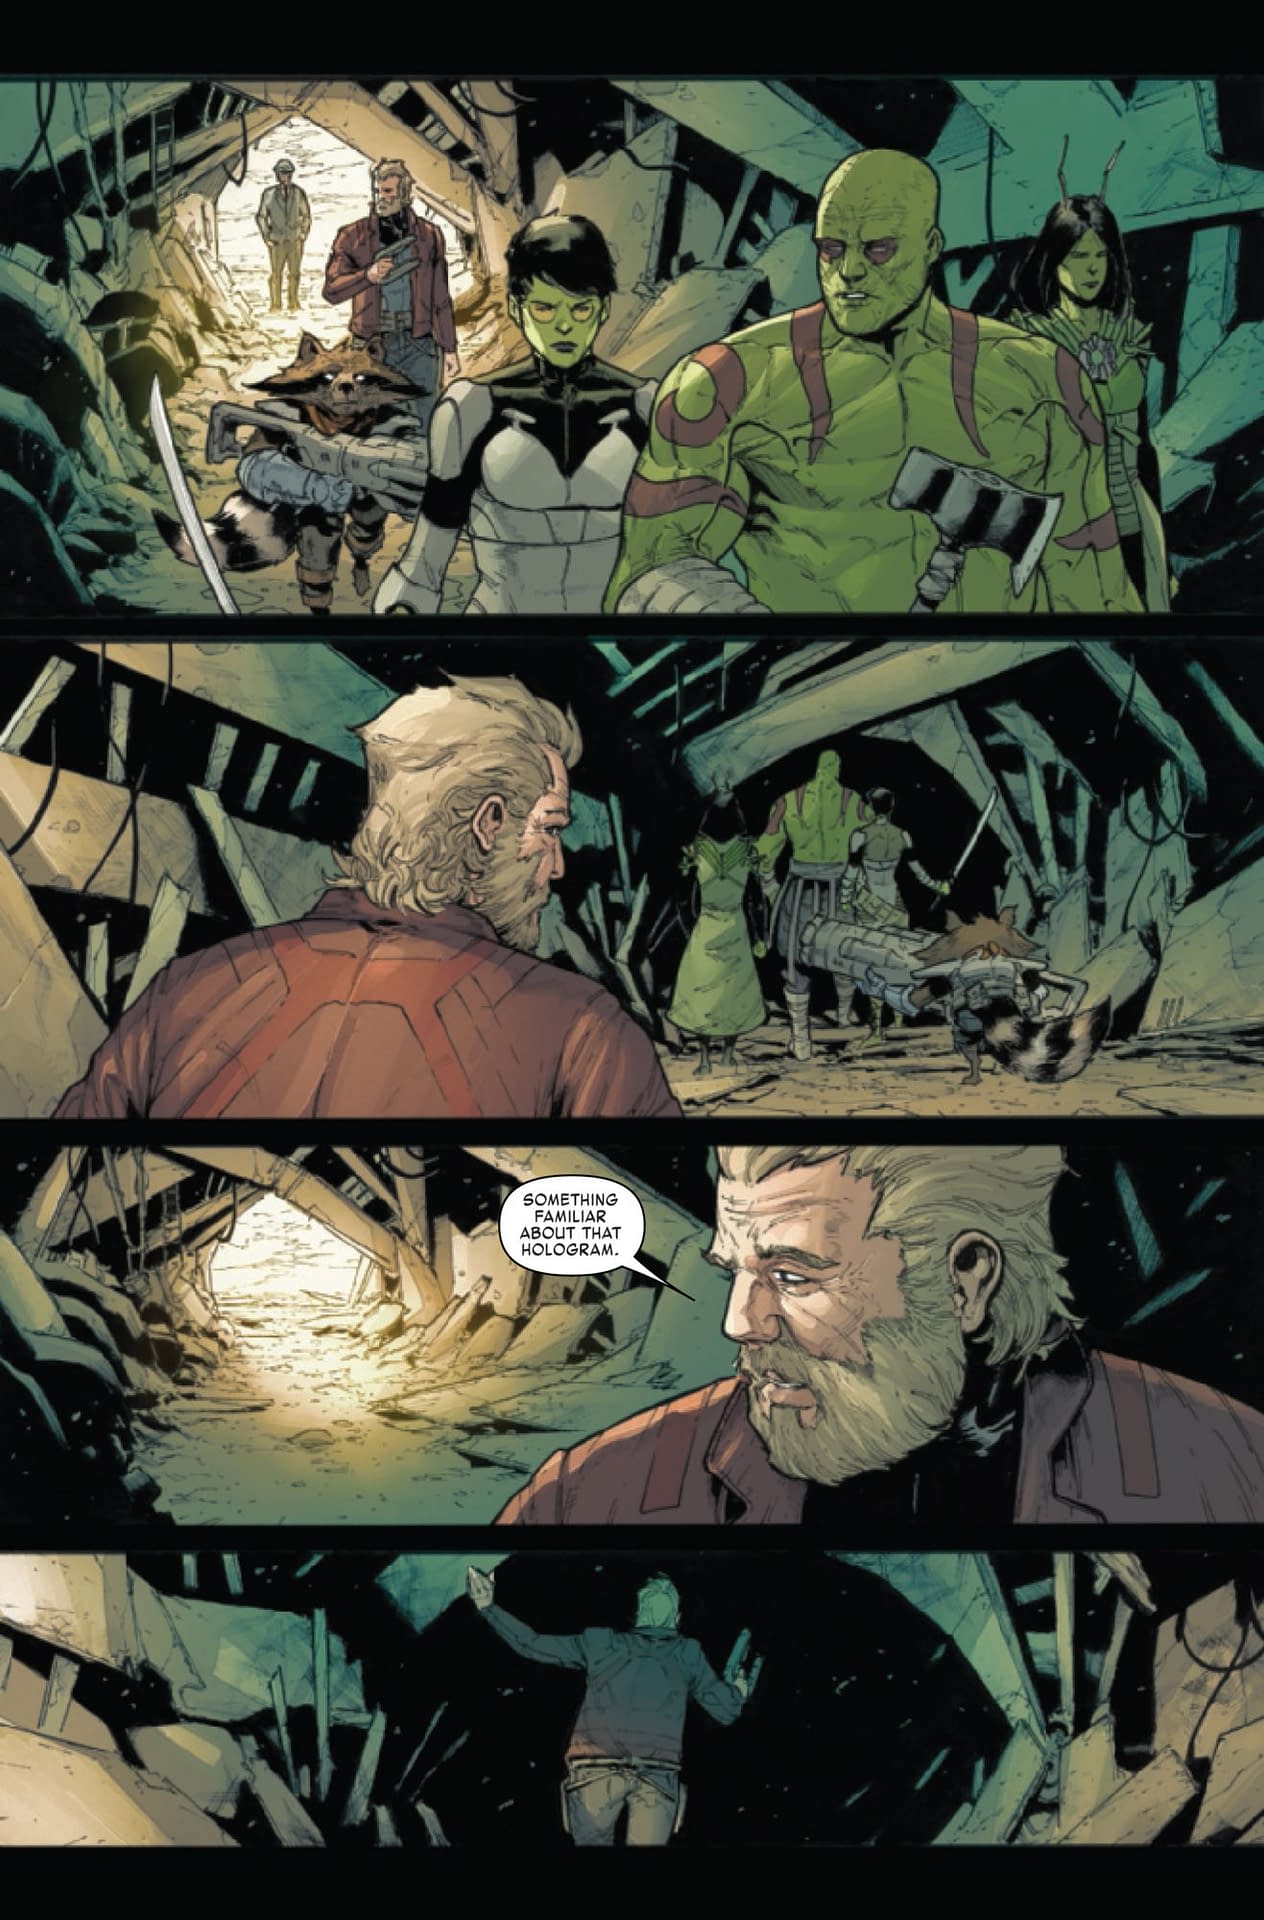 The Final Fate of Willie Lumpkin? Old Man Quill #7 Preview